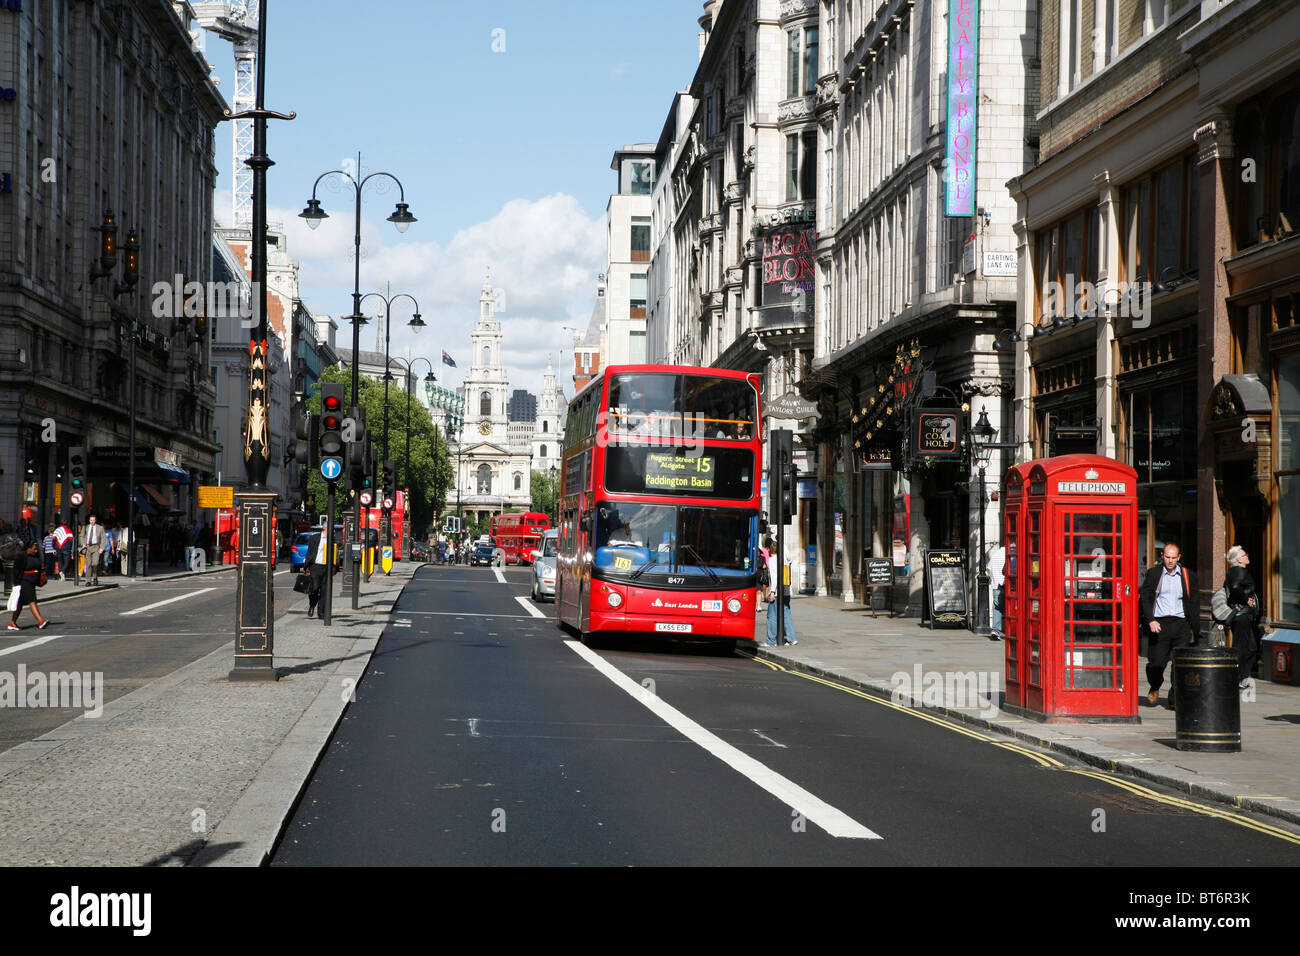 Number 15 bus on The Strand, London, UK Stock Photo